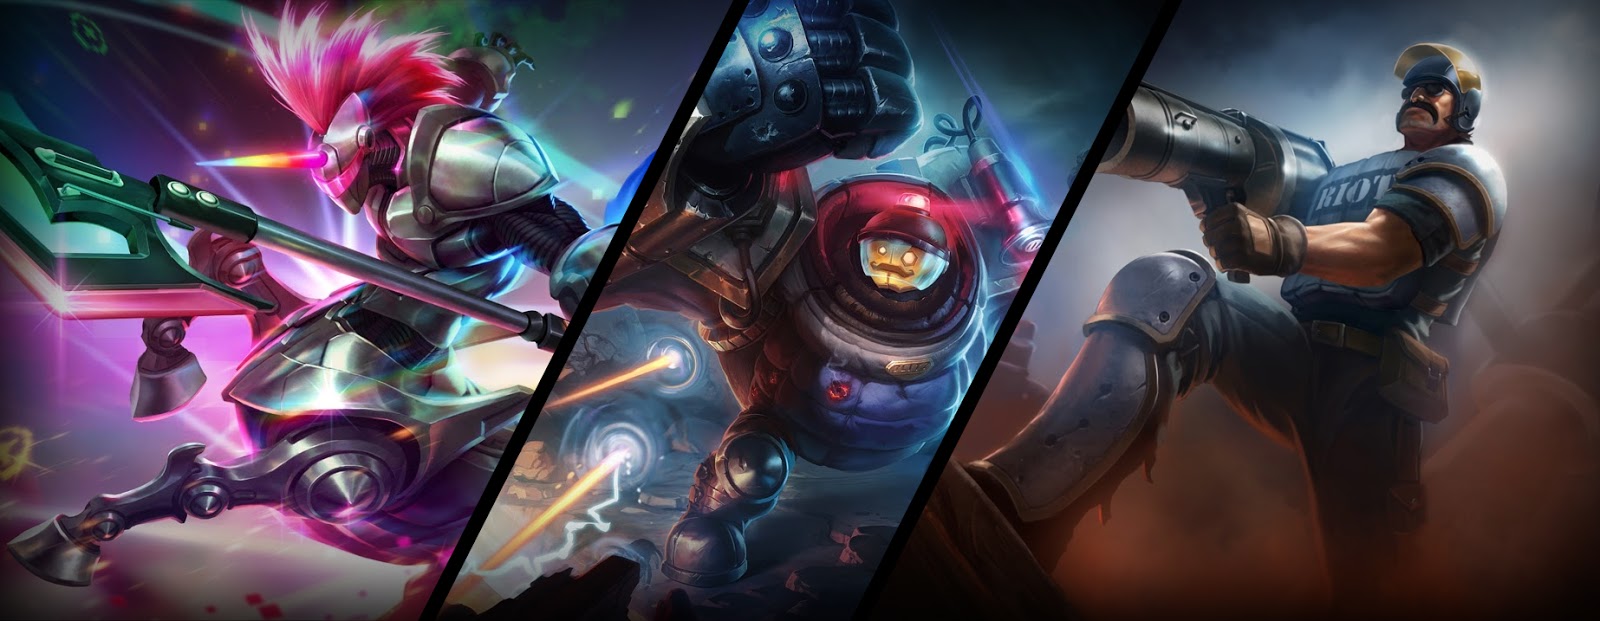 Surrender At Arcade Hecarim And Riot Blitzcrank Now Available